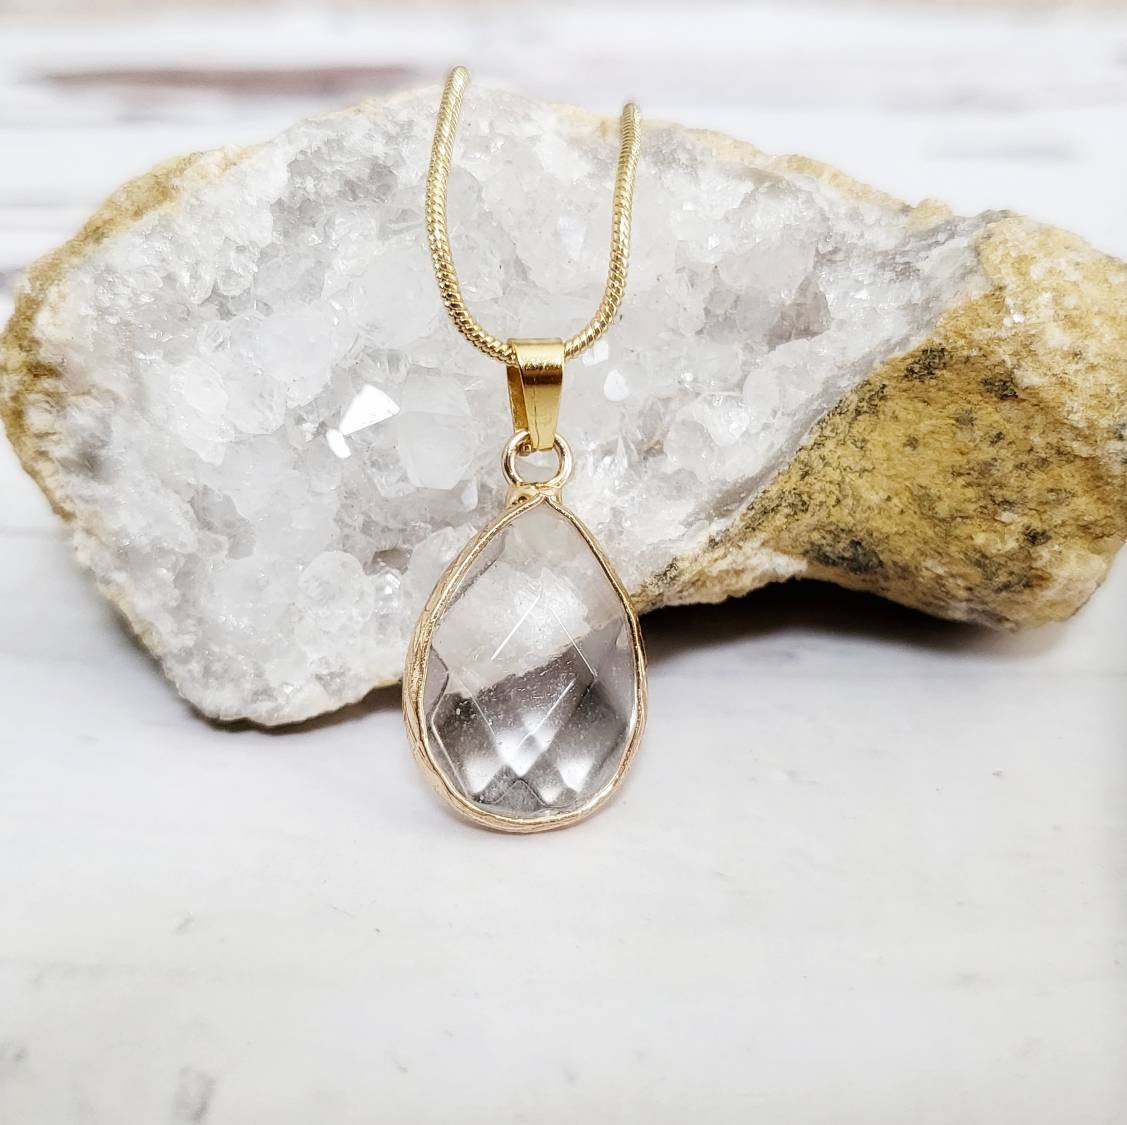 CLEAR QUARTZ | Gold Snake Chain Cryst Necklace | Gemstone for Clarity, Harmony, Amplification | Minimalist Metaphysical Spiritual Jewelry